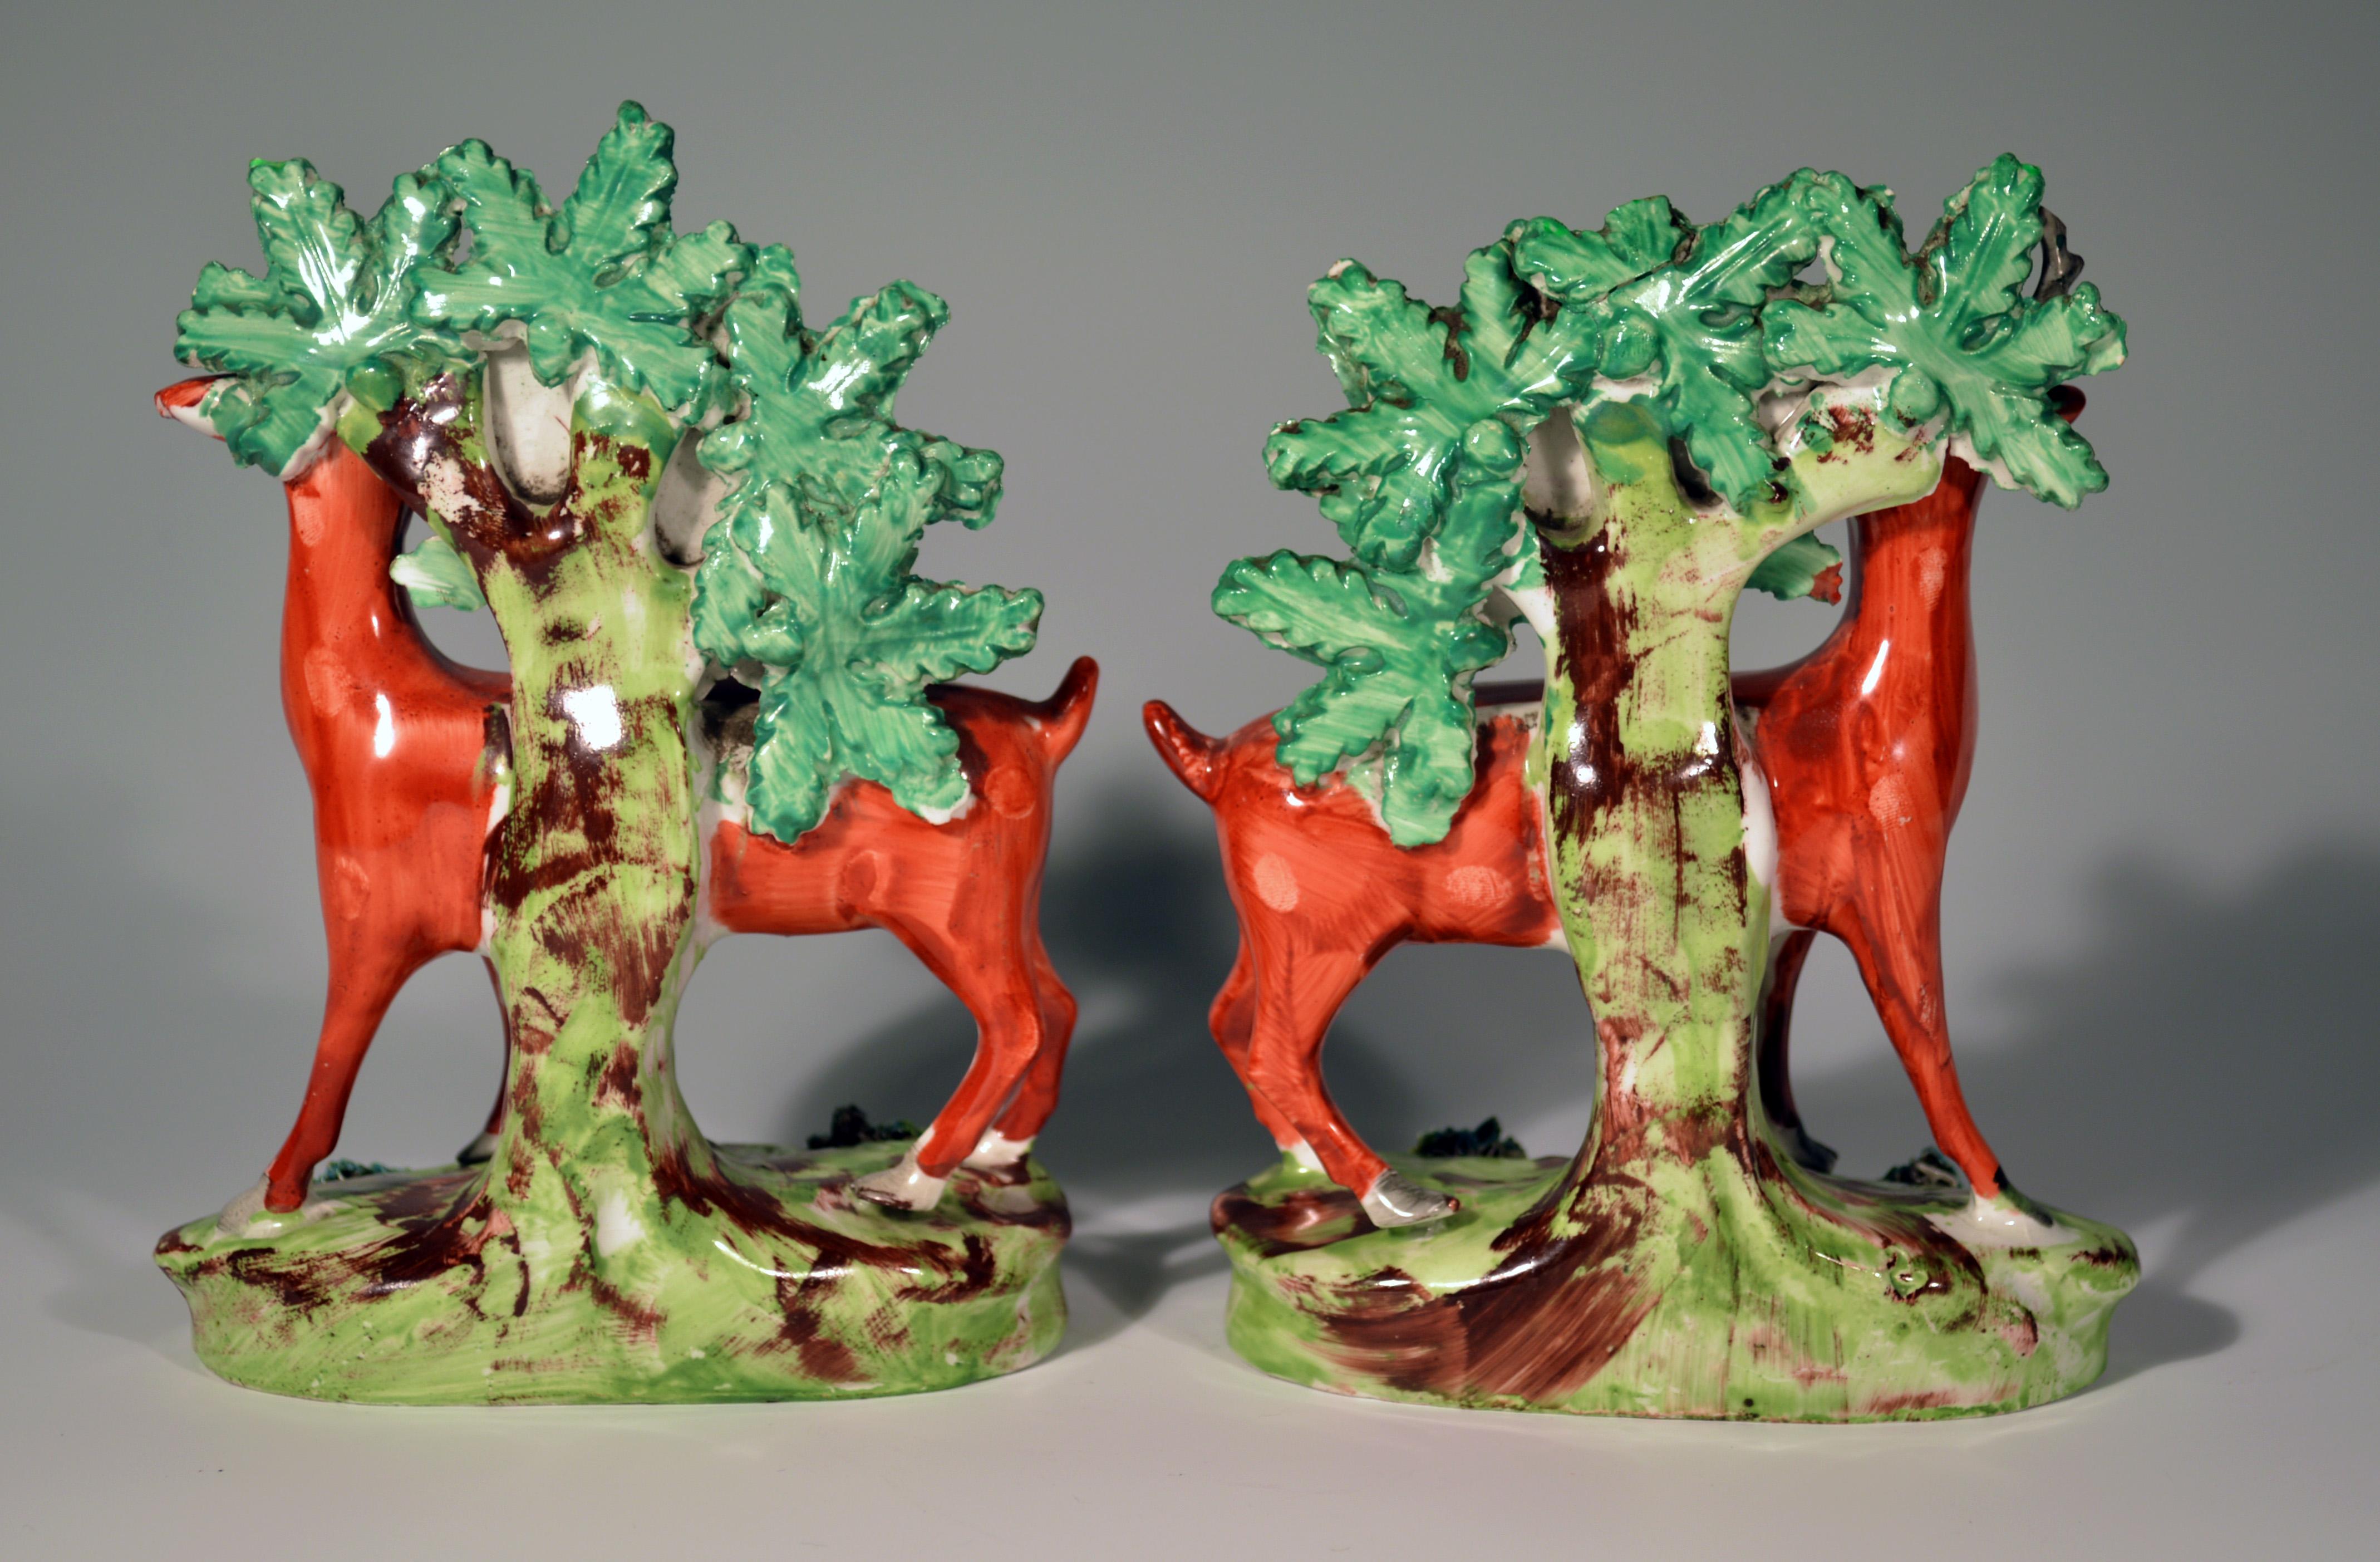 19th Century Early Staffordshire Pearlware Pair of Deer Bocage Figures, circa 1825